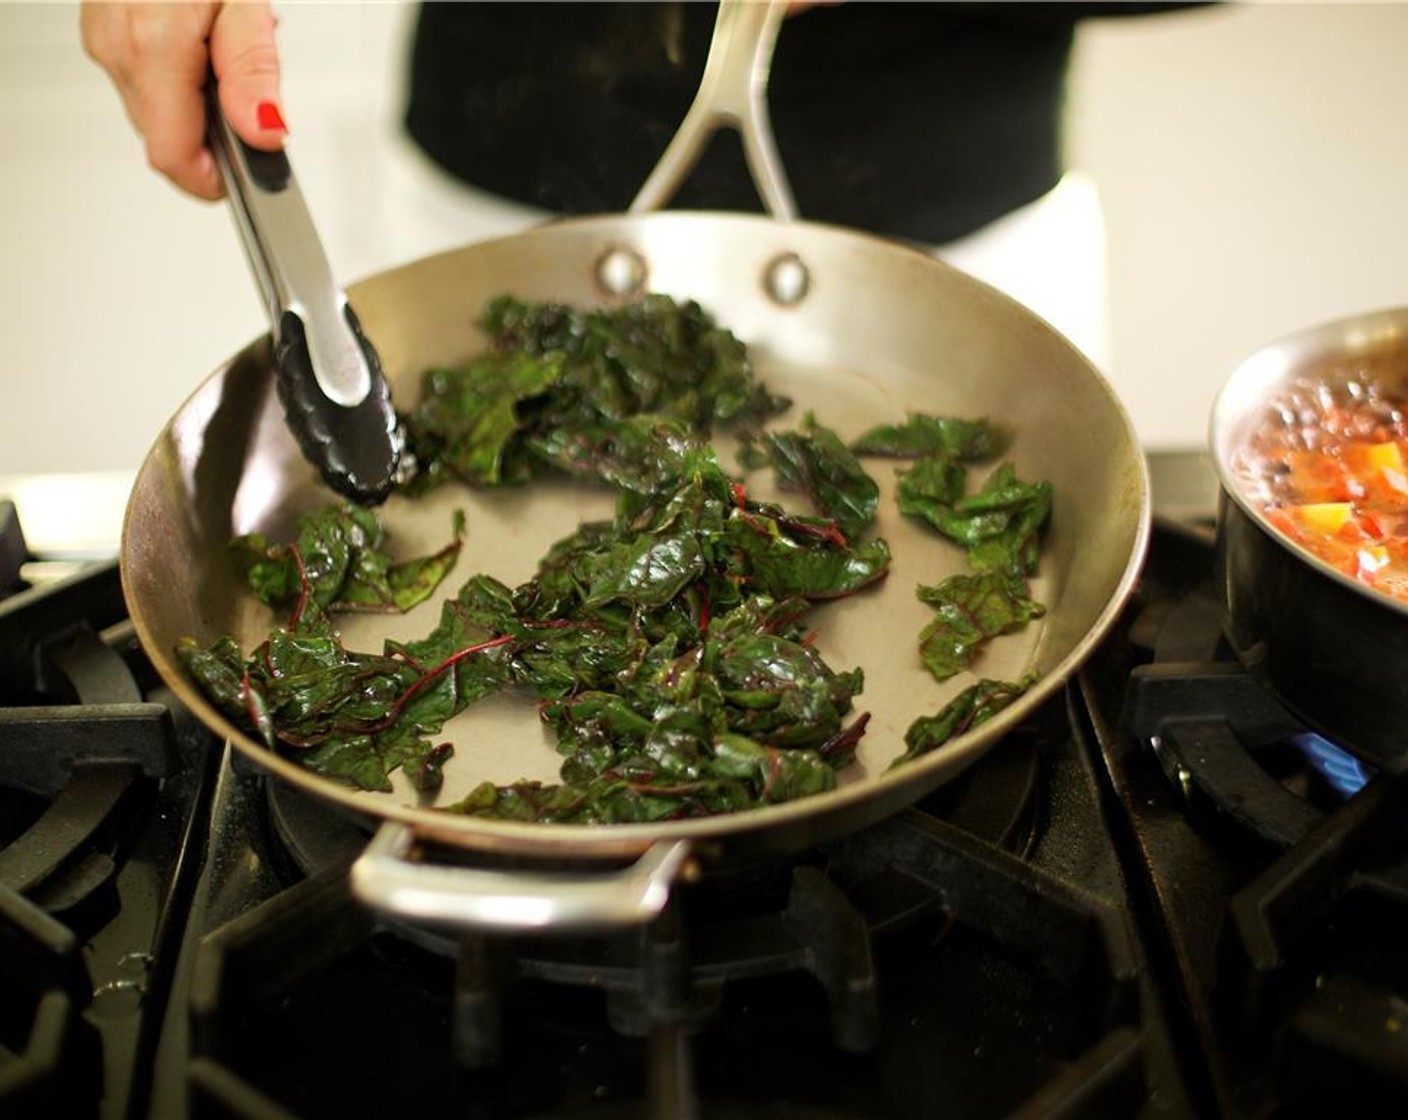 step 9 In the same saute pan, heat Olive Oil (1 Tbsp) over medium-high heat. When hot, add the Chard (4 3/4 cups) and saute for 2 minutes. Season with Salt (1/4 tsp) and Ground Black Pepper (1/4 tsp). Stir and remove from heat.